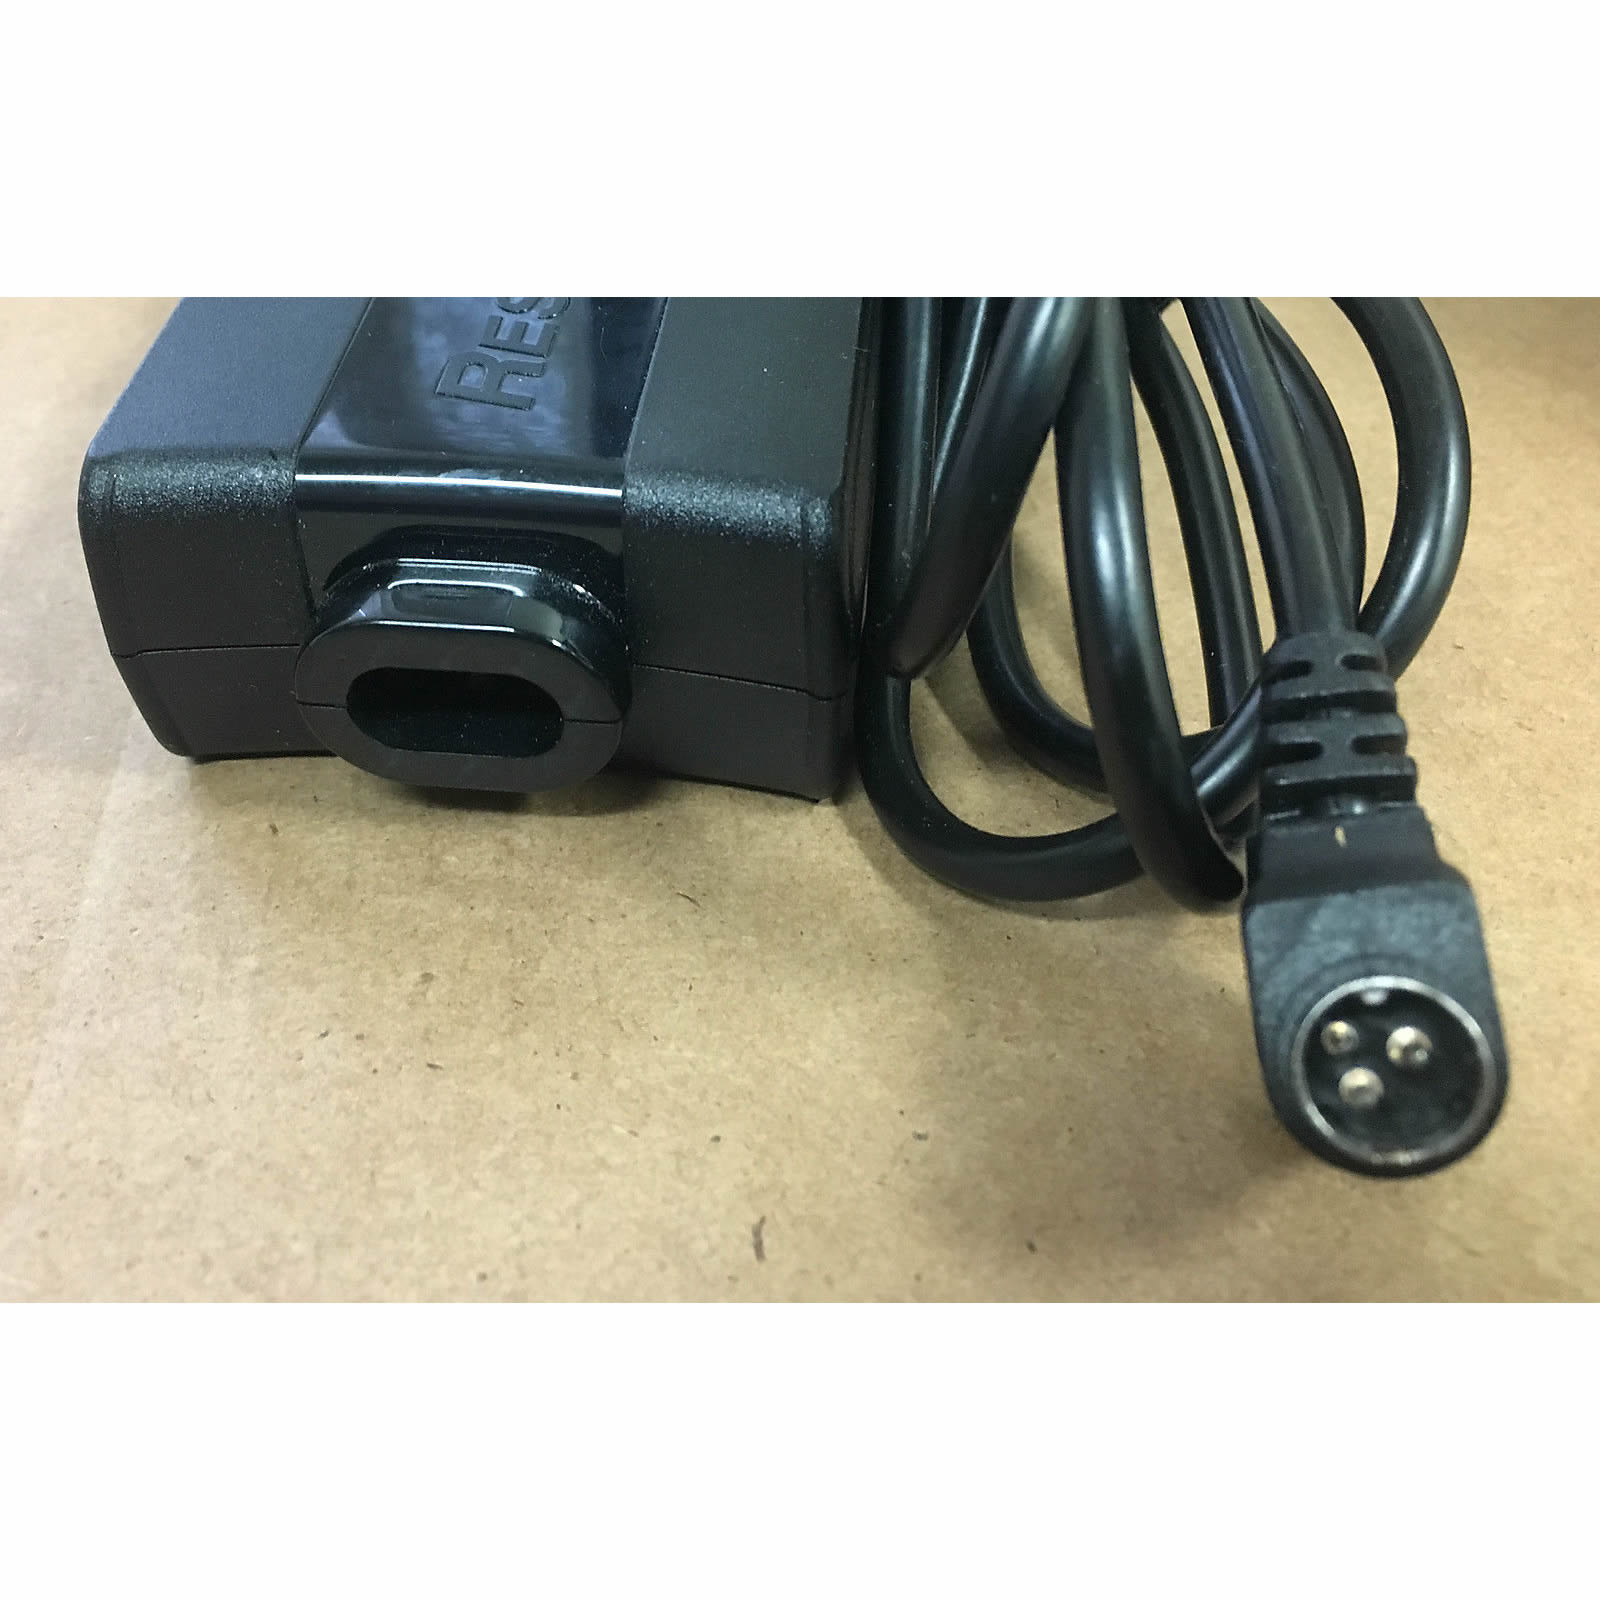 resmed s9 series cpap laptop ac adapter